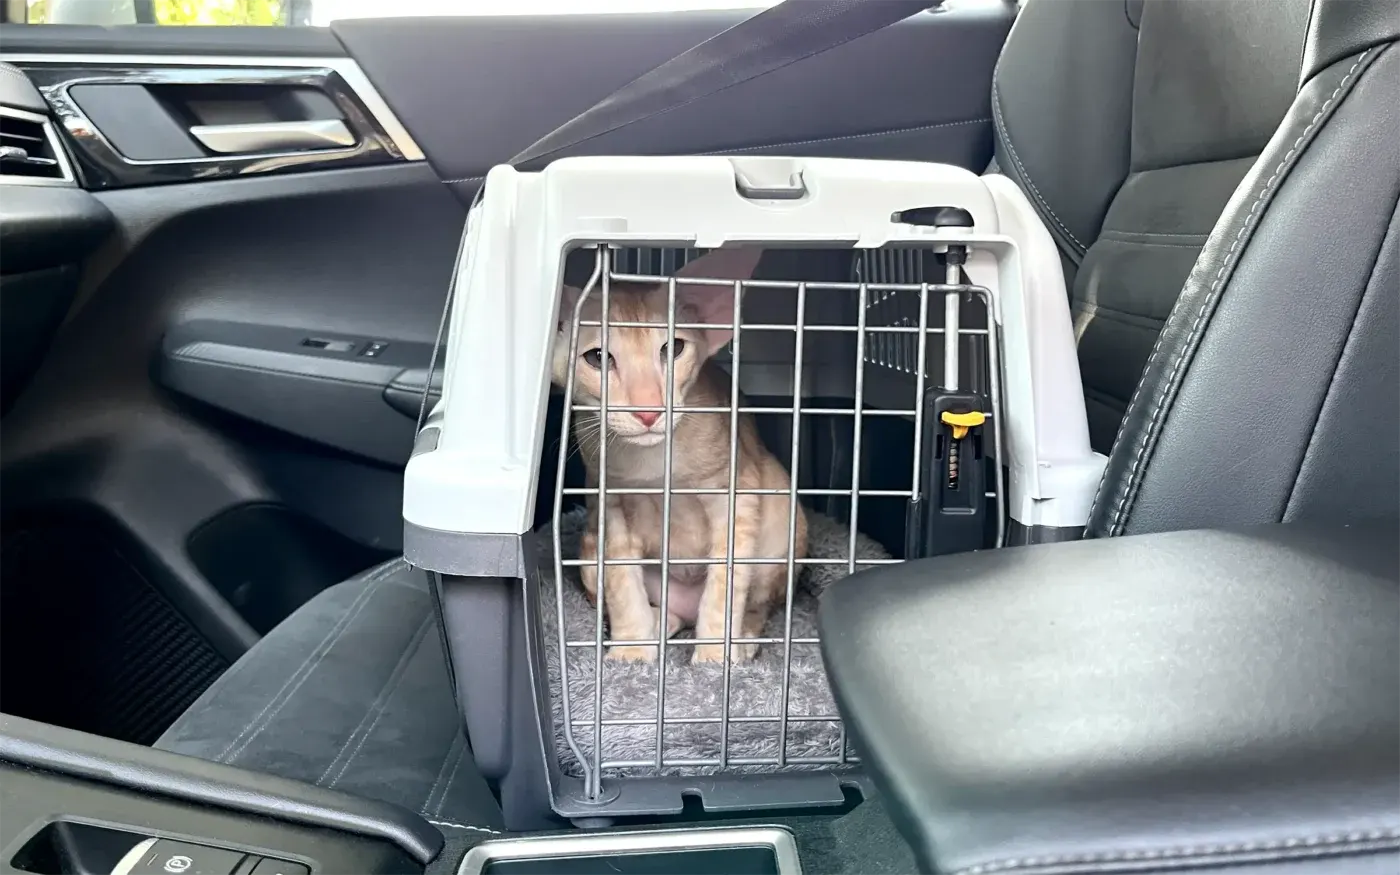 Oriental Shorthair kitten sits comfortably in a secure pet carrier placed on the passenger seat of a car, ready for transportation. The carrier is safely secured with a seatbelt, ensuring the kitten's safety during the journey. The car's interior is modern and clean, reflecting a well-planned and caring approach to pet travel.